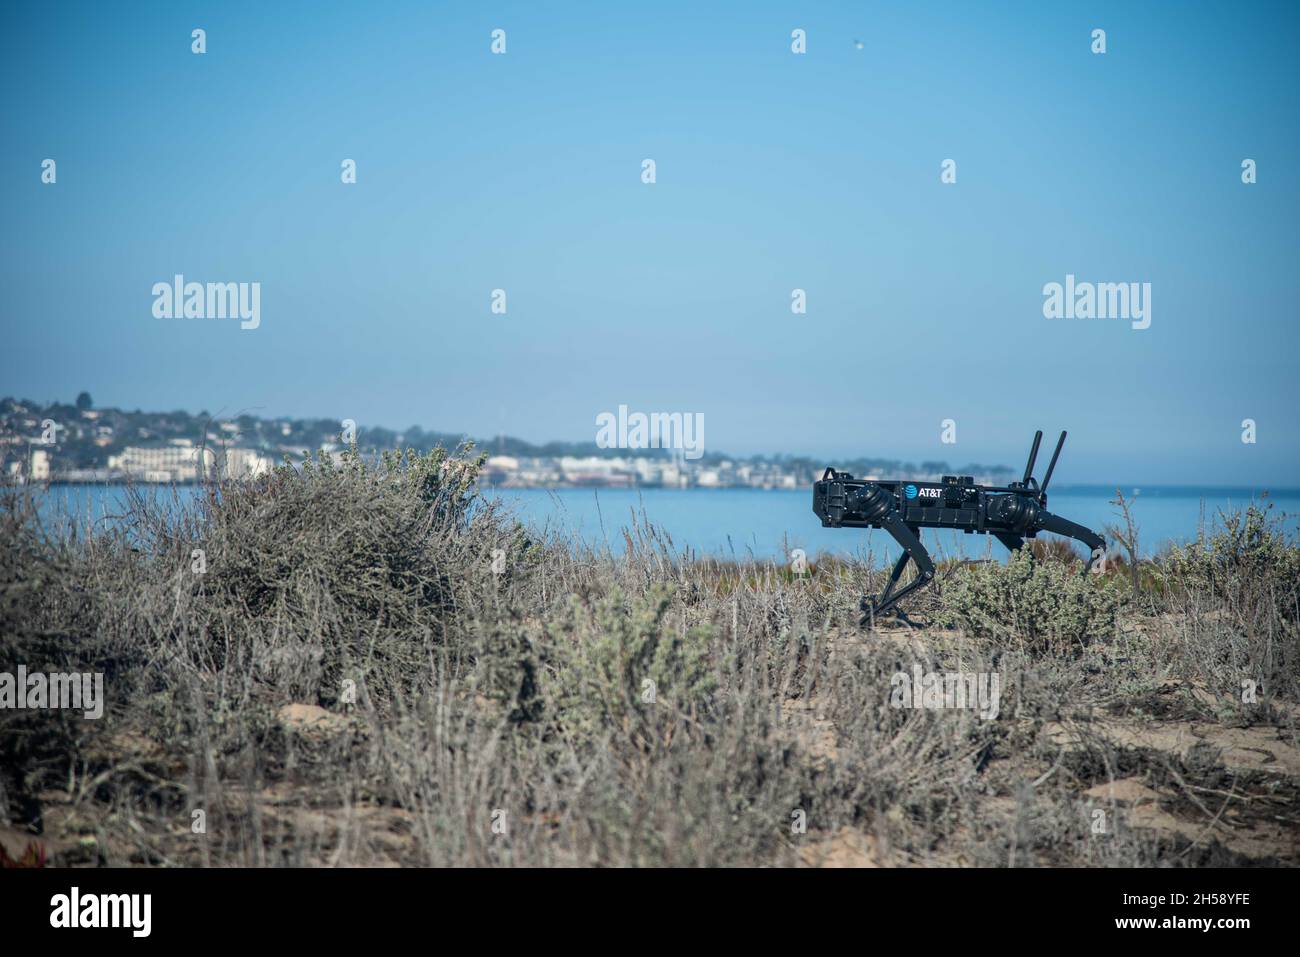 Monterey, United States of America. 03 November, 2021. A U.S. Air Force AT&T robotic dog Fido-G operates in the Sea Land Air Military Research facility during its Joint Interagency Field Experimentation November 3, 2021 in Monterey, California. Credit: MC2 James Norket/US Navy Photo/Alamy Live News Stock Photo